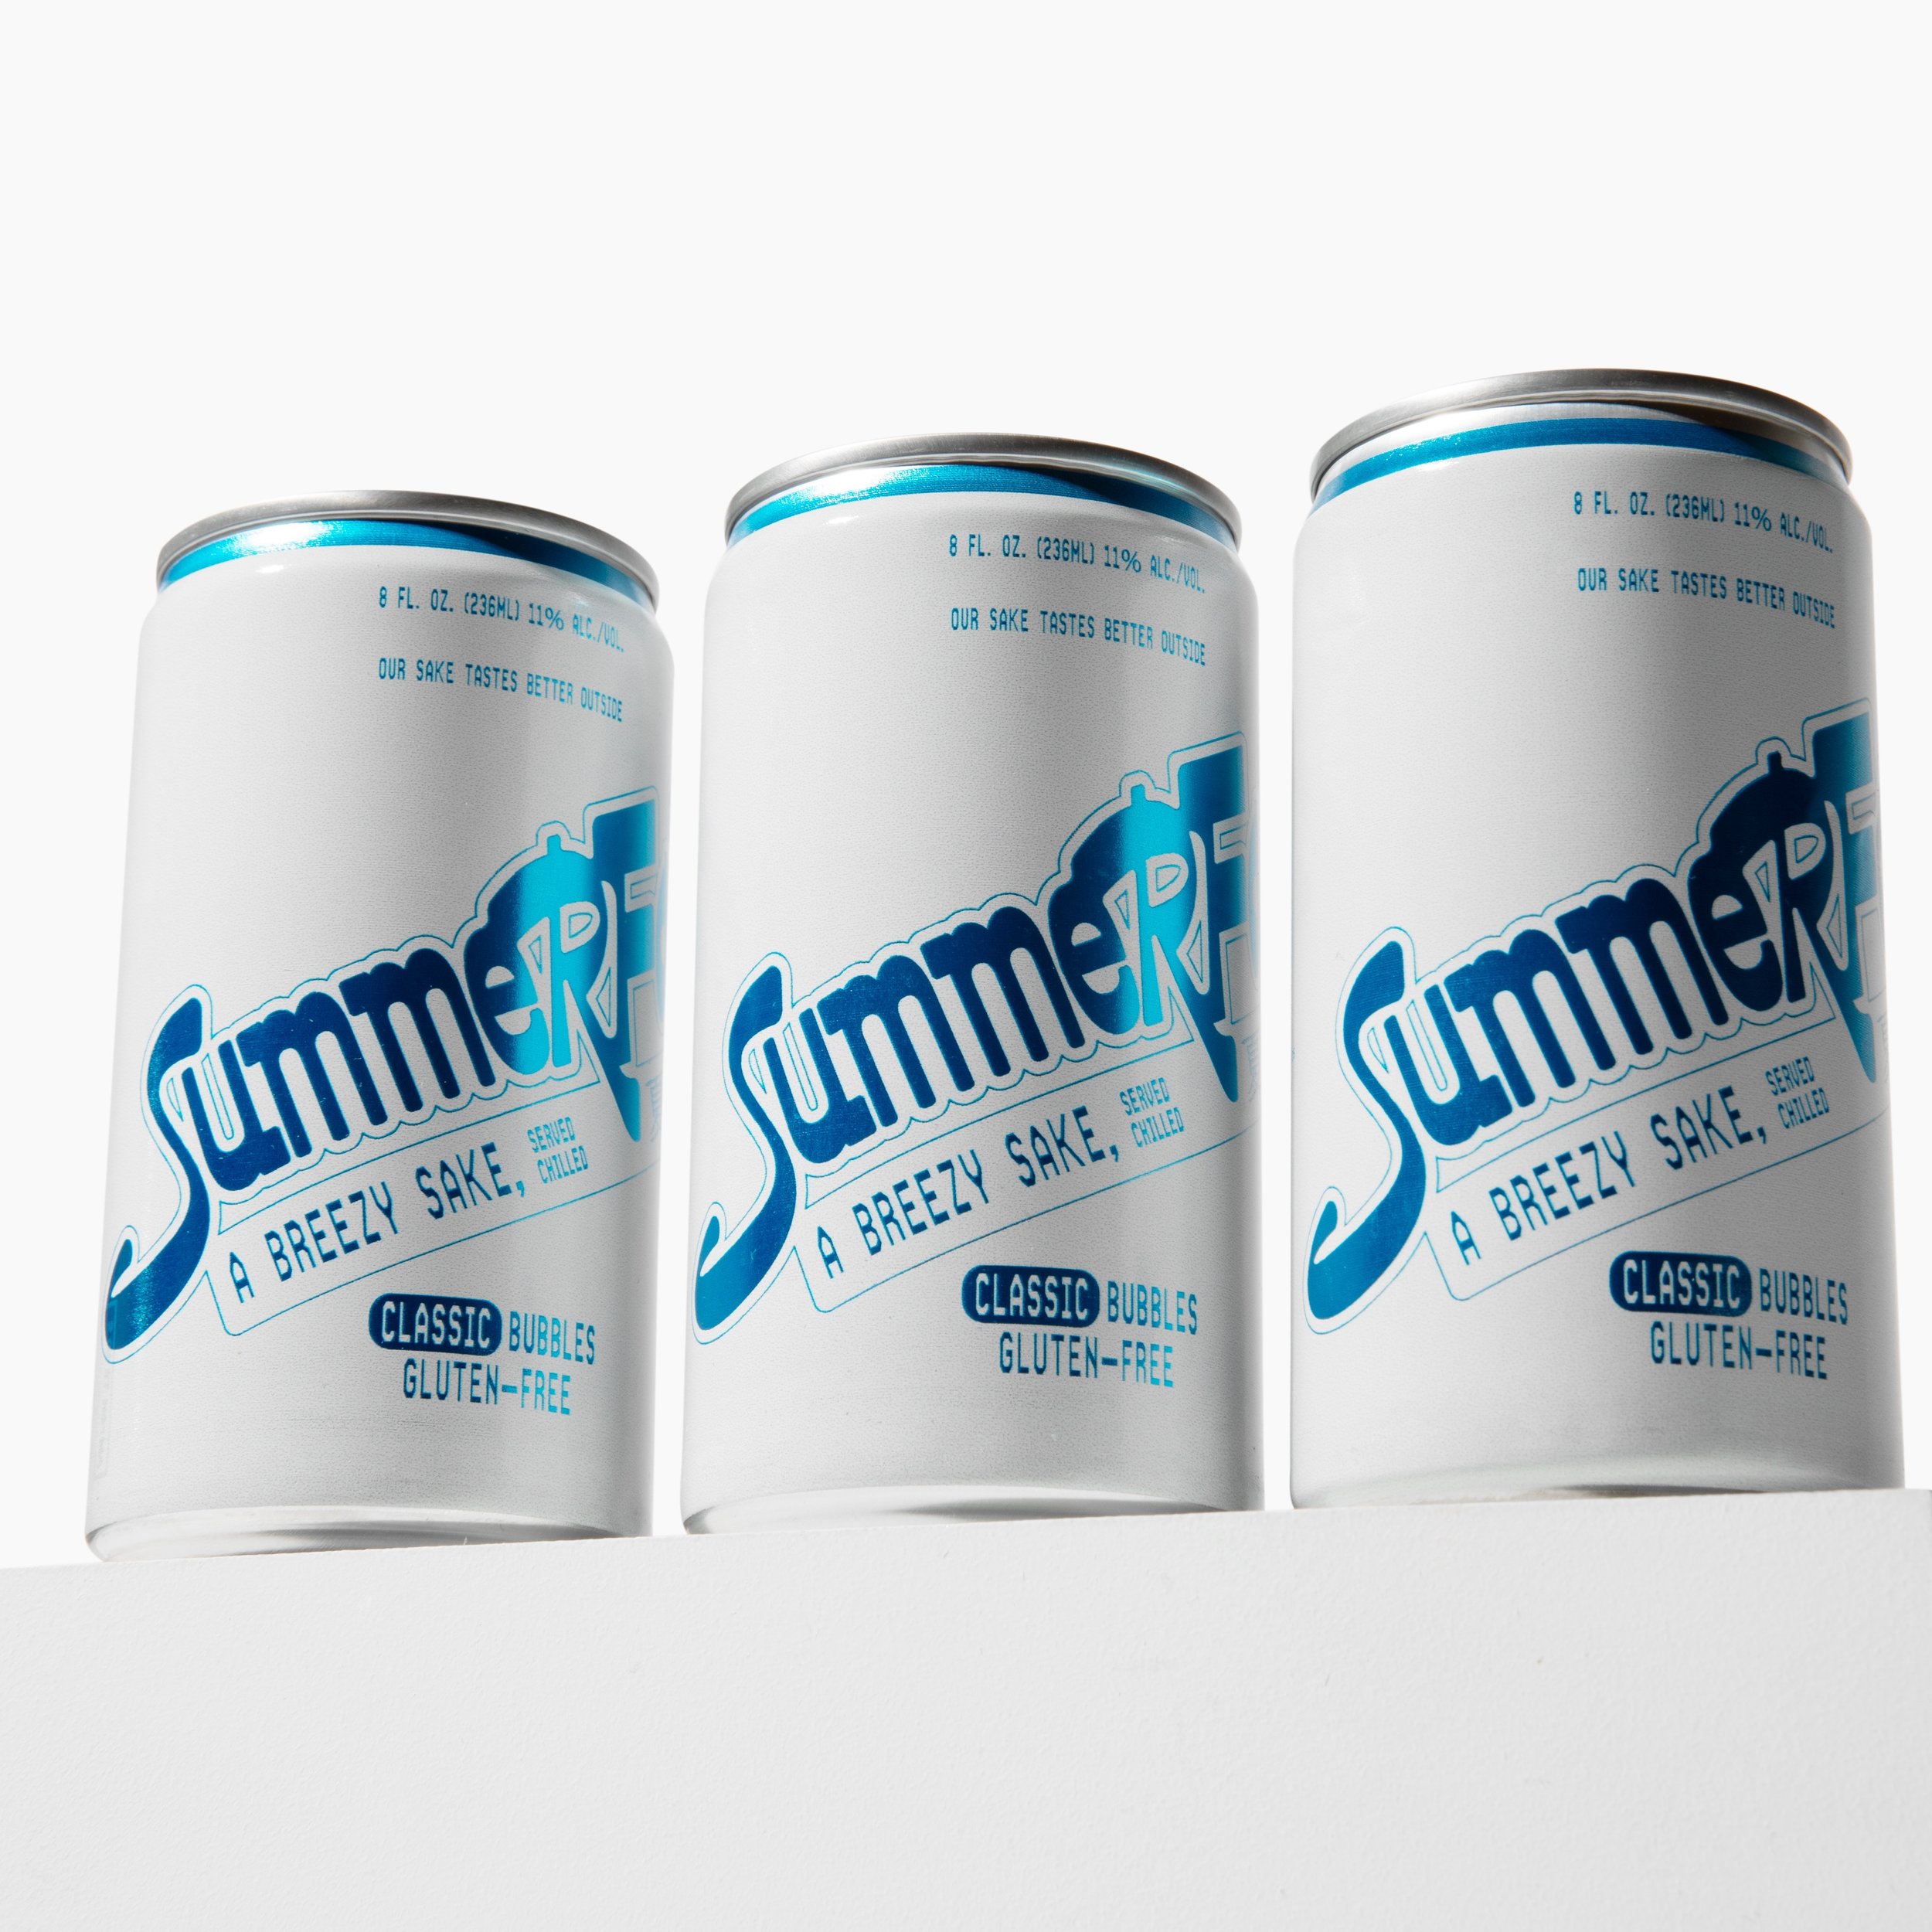 &ldquo;While you&rsquo;re assembling your park picnic basket, throw in what might be the new canned spritz of the season: SummerFall, a sparkling sake made with locally sourced California rice and enriched by wine fermentation methods. Handcrafted in